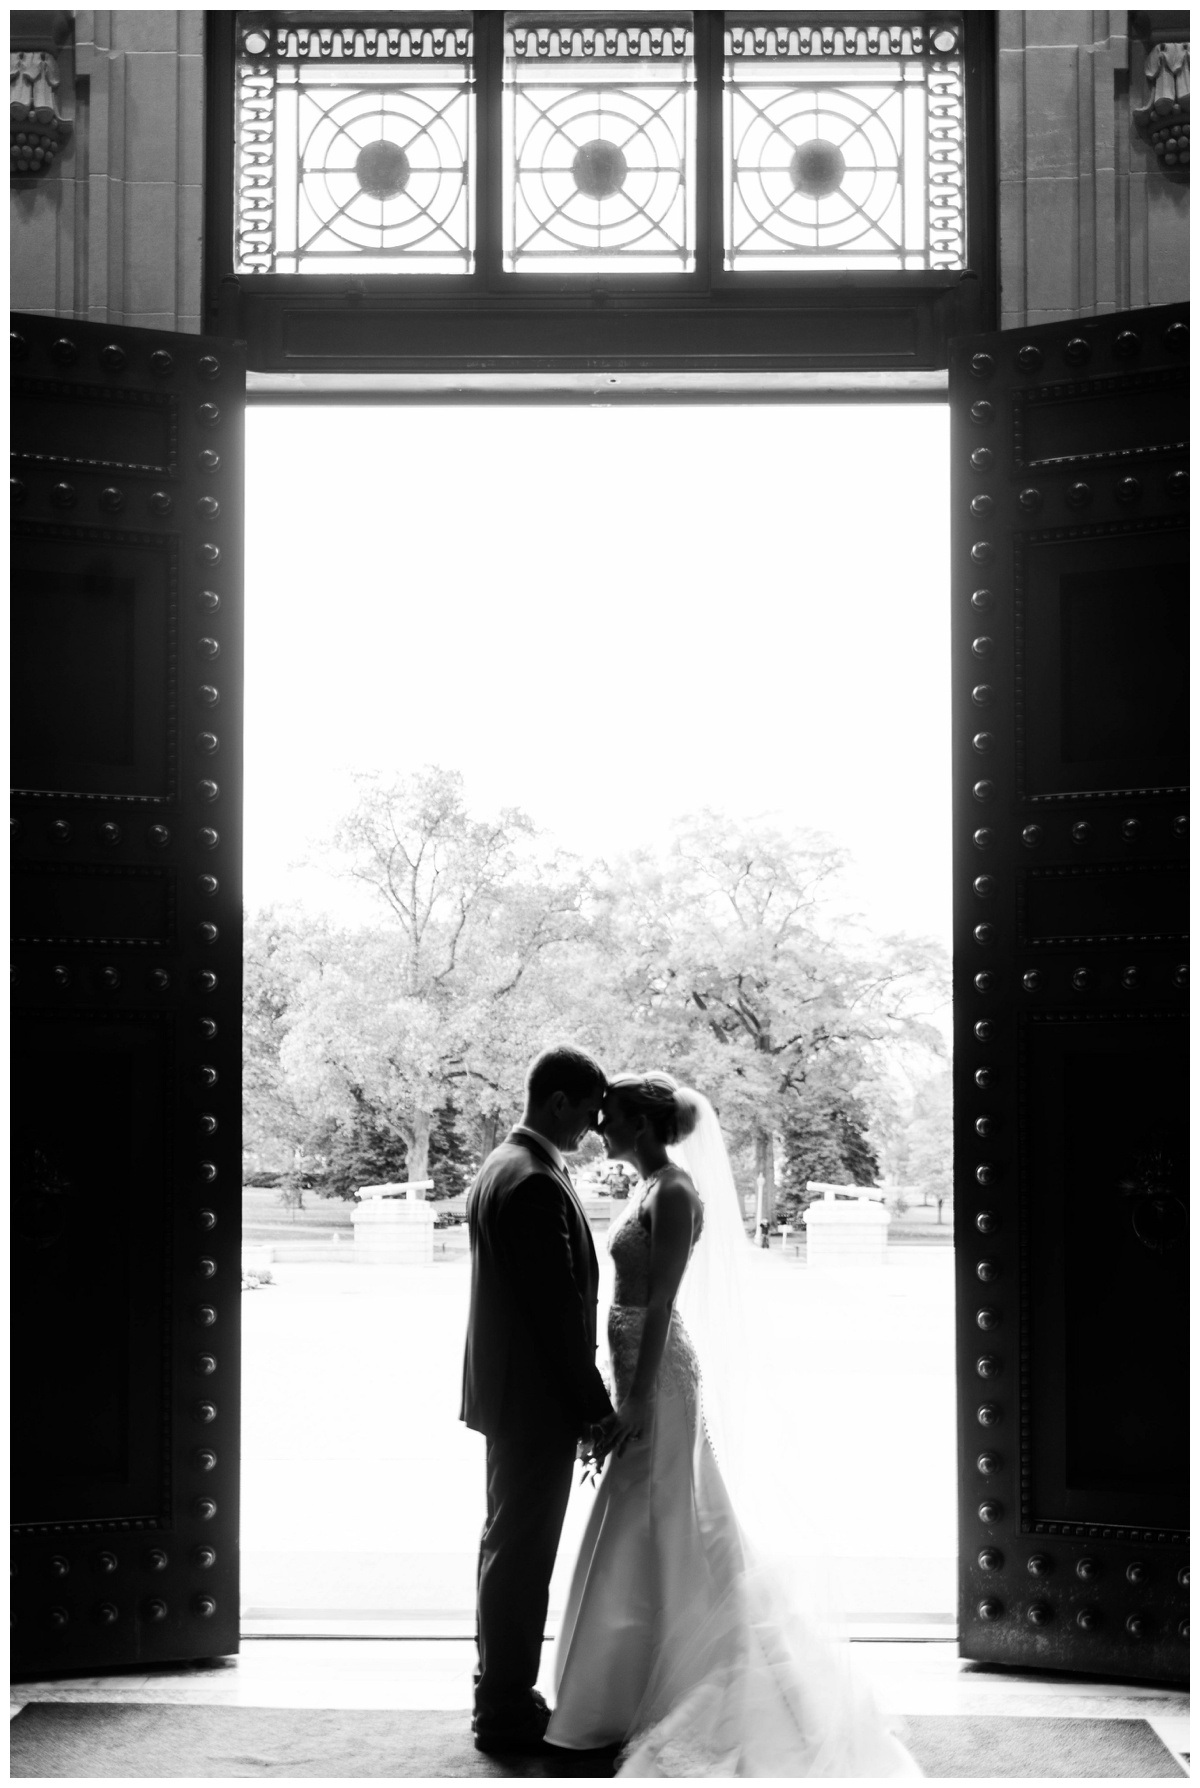 United States Naval Academy chapel wedding veil bride and groom just married photo black and white doors 